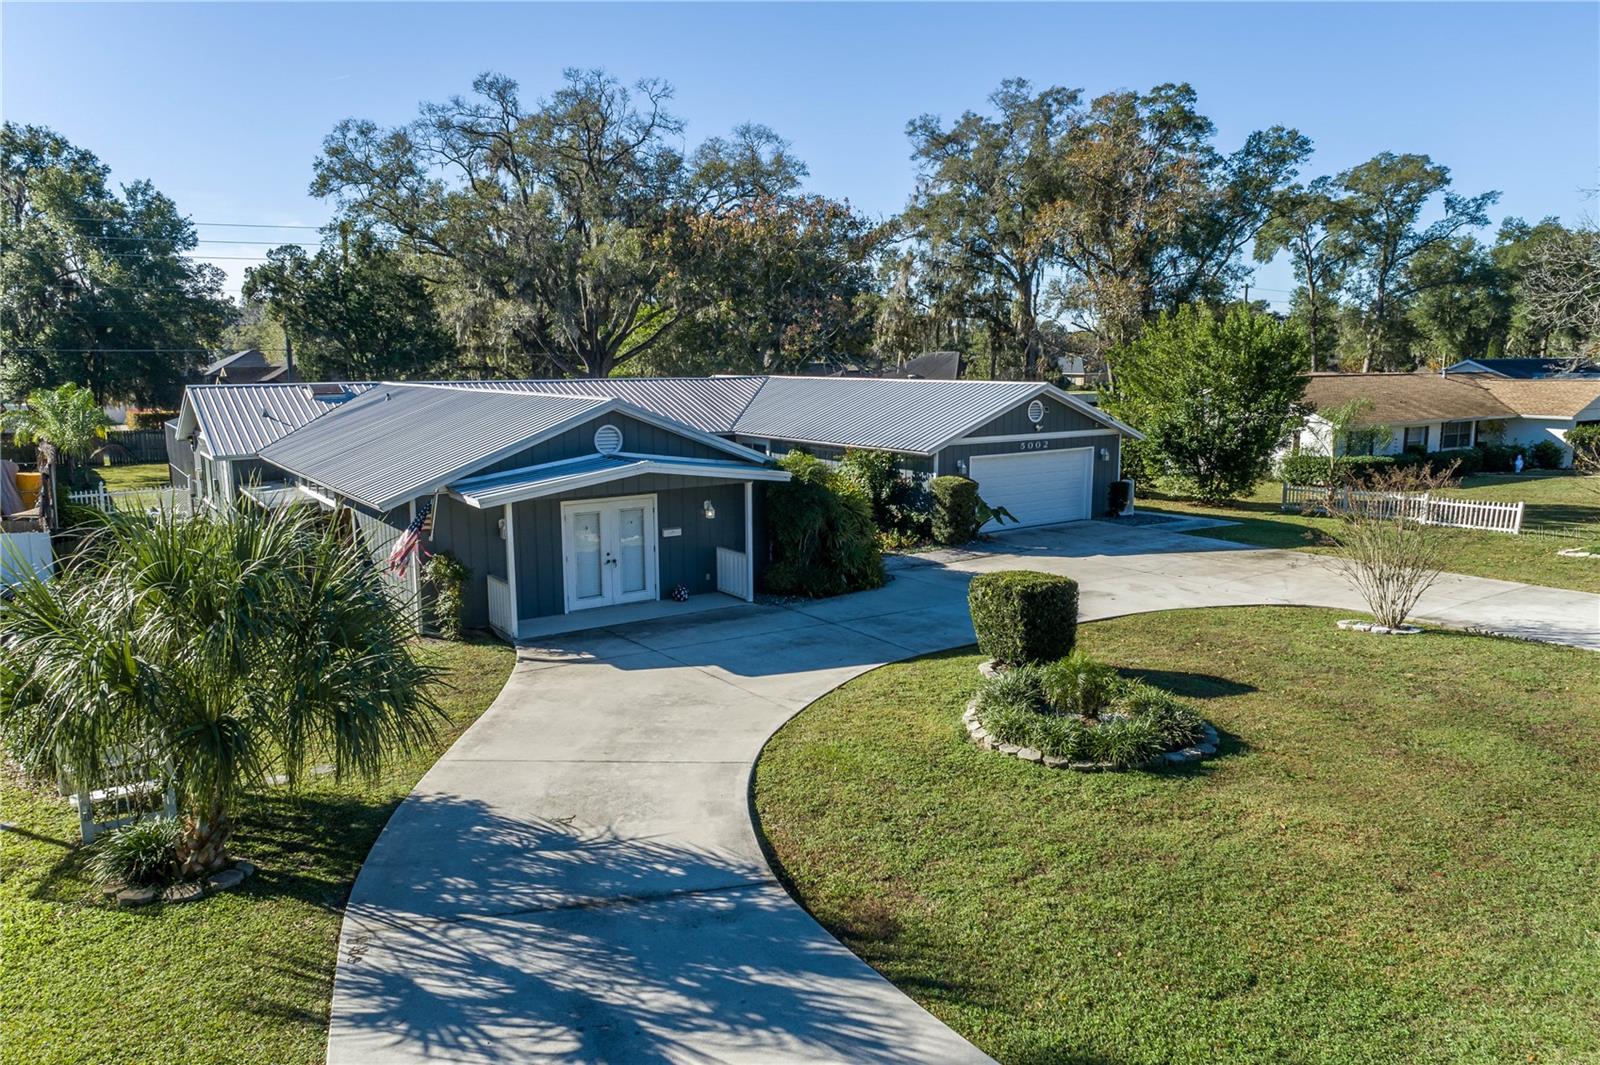 Details for 5002 7th Place, OCALA, FL 34471